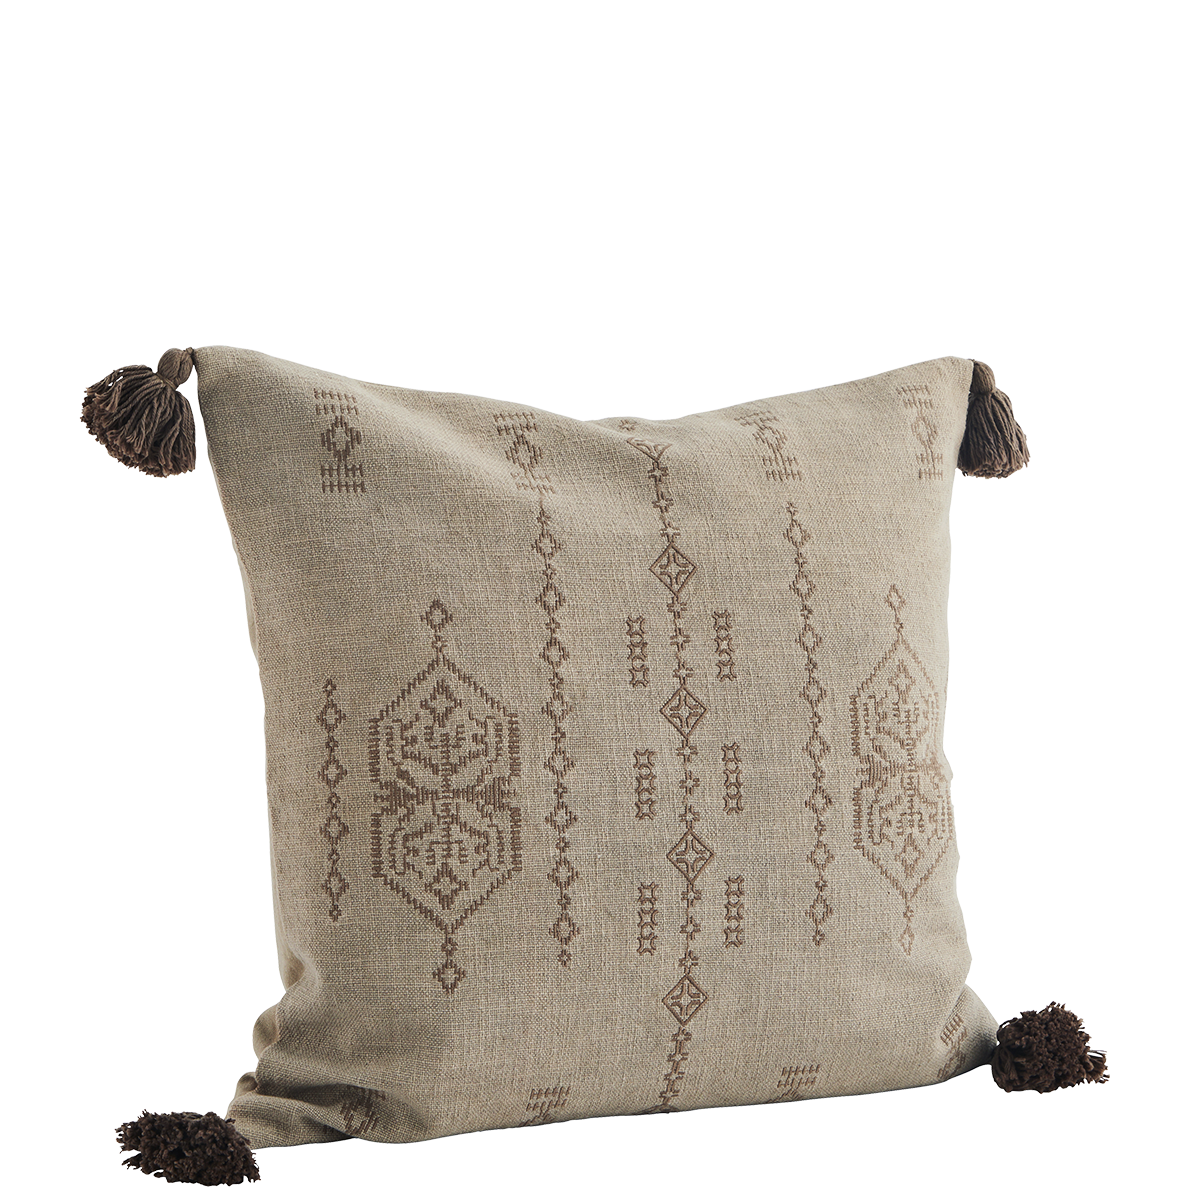 Embroidered cushion cover w/ tassels